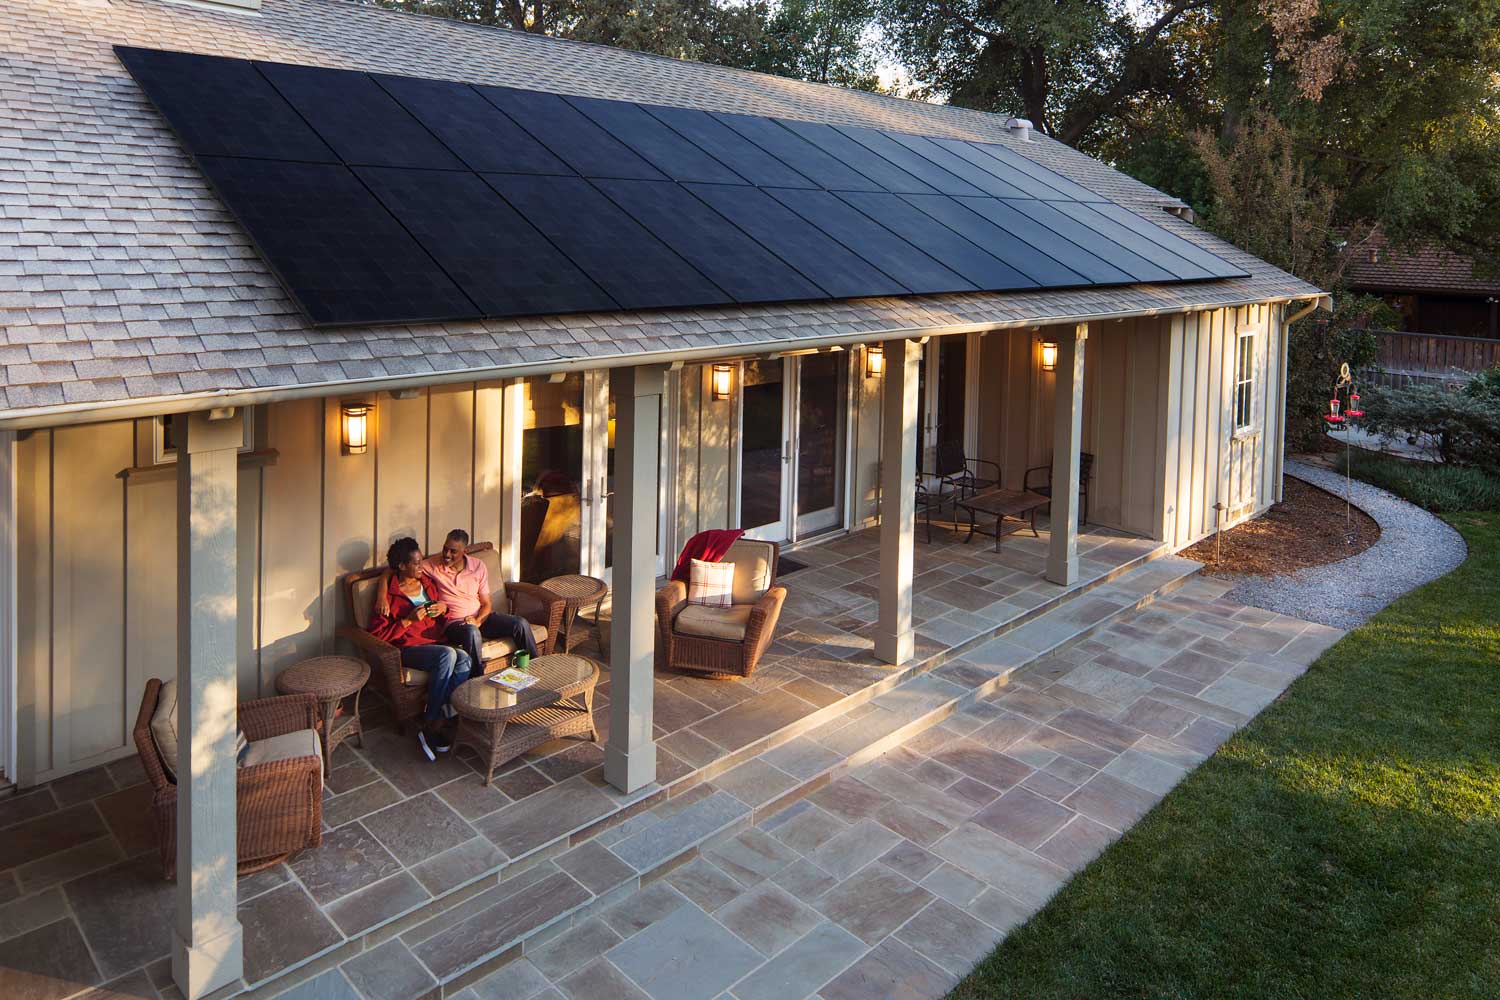 This lovely back patio also features solar panels with SunPower by Custom Energy.